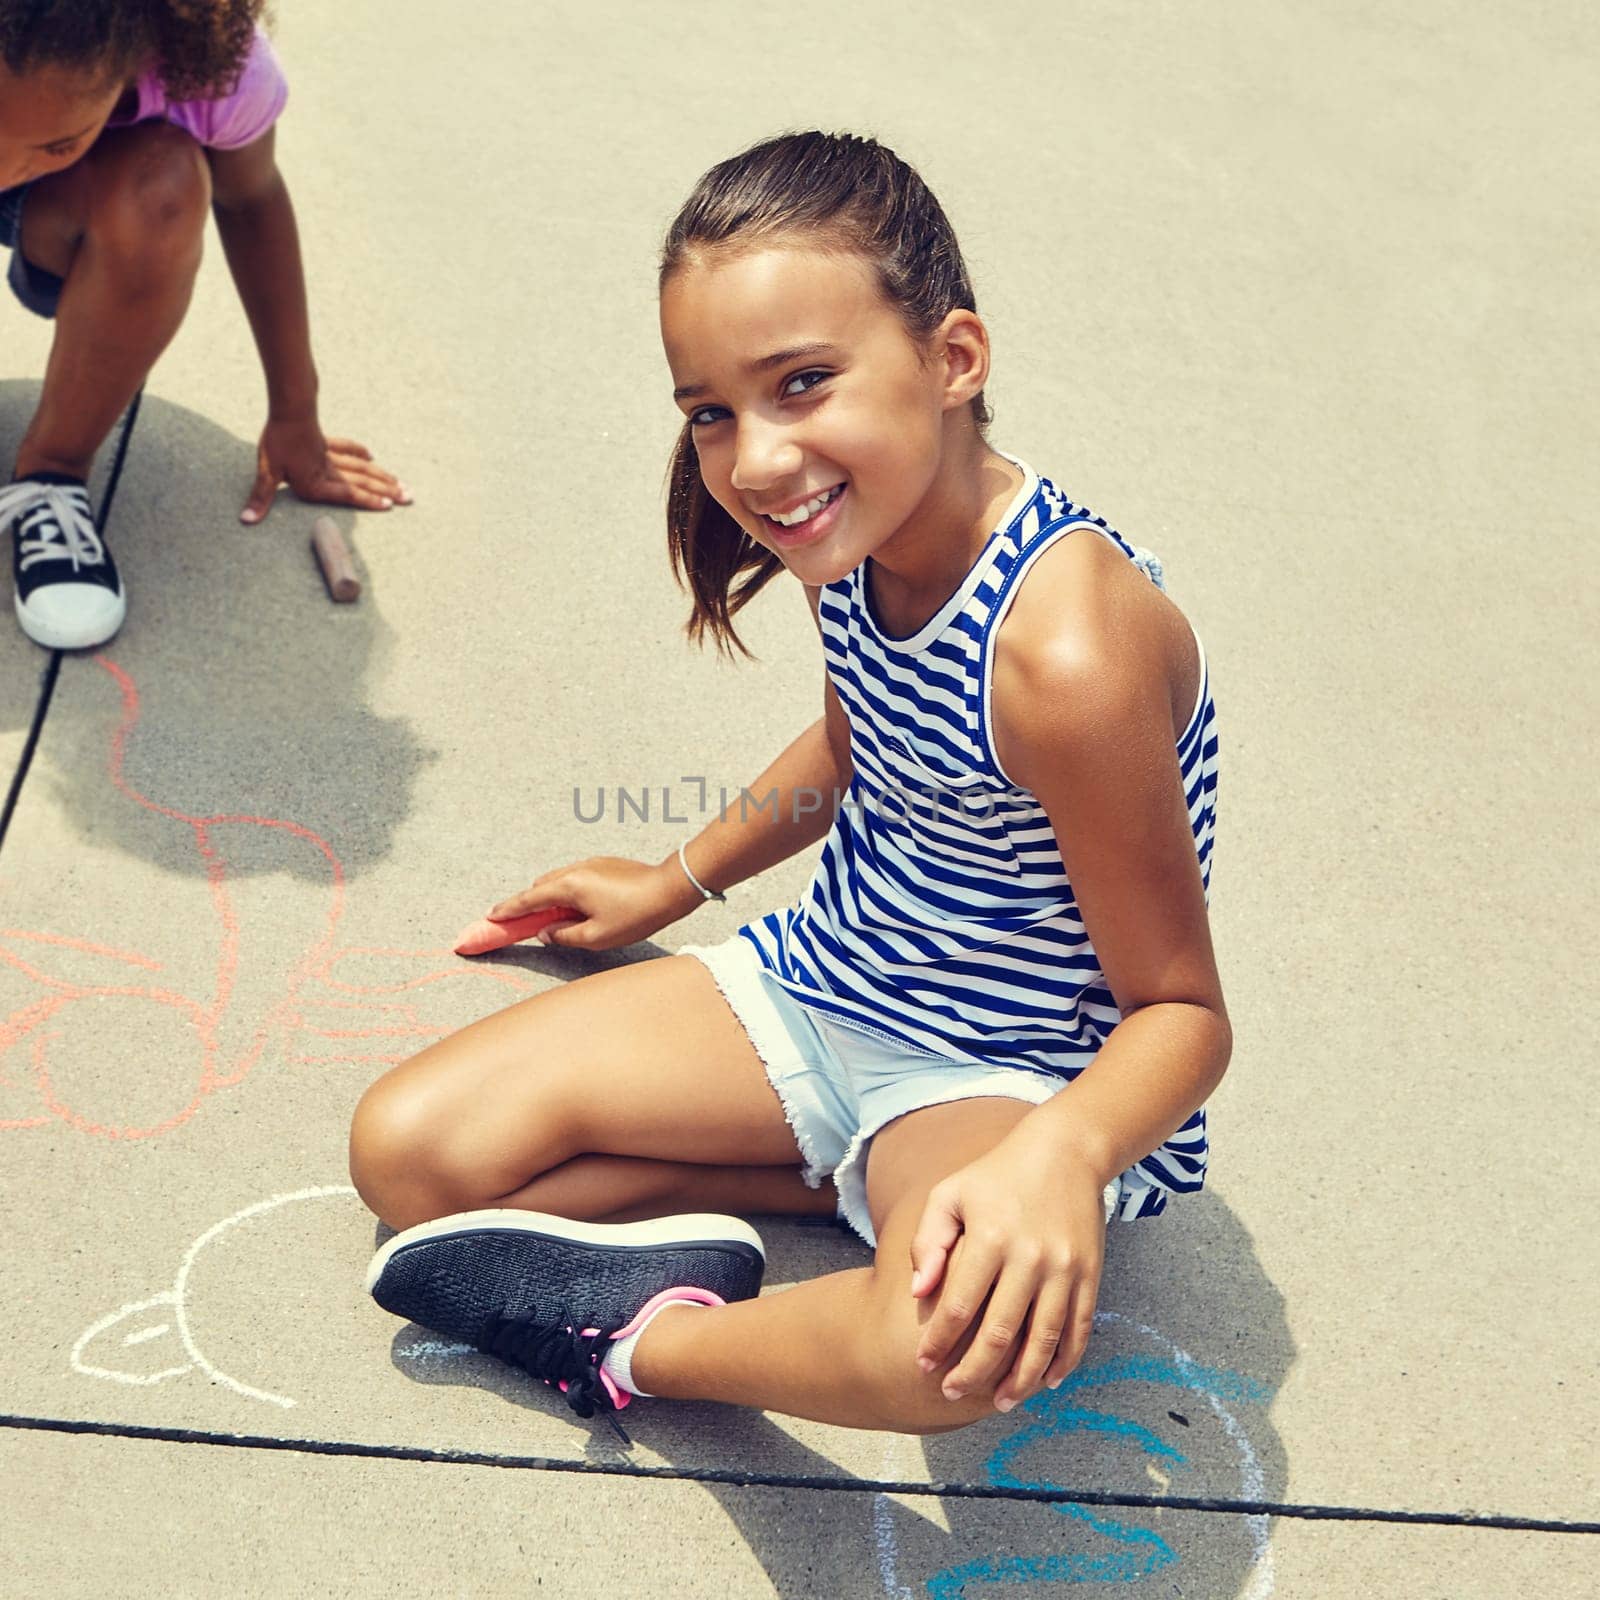 Getting creative with chalk. adorable little girls drawing with chalk on the pavement outdoors